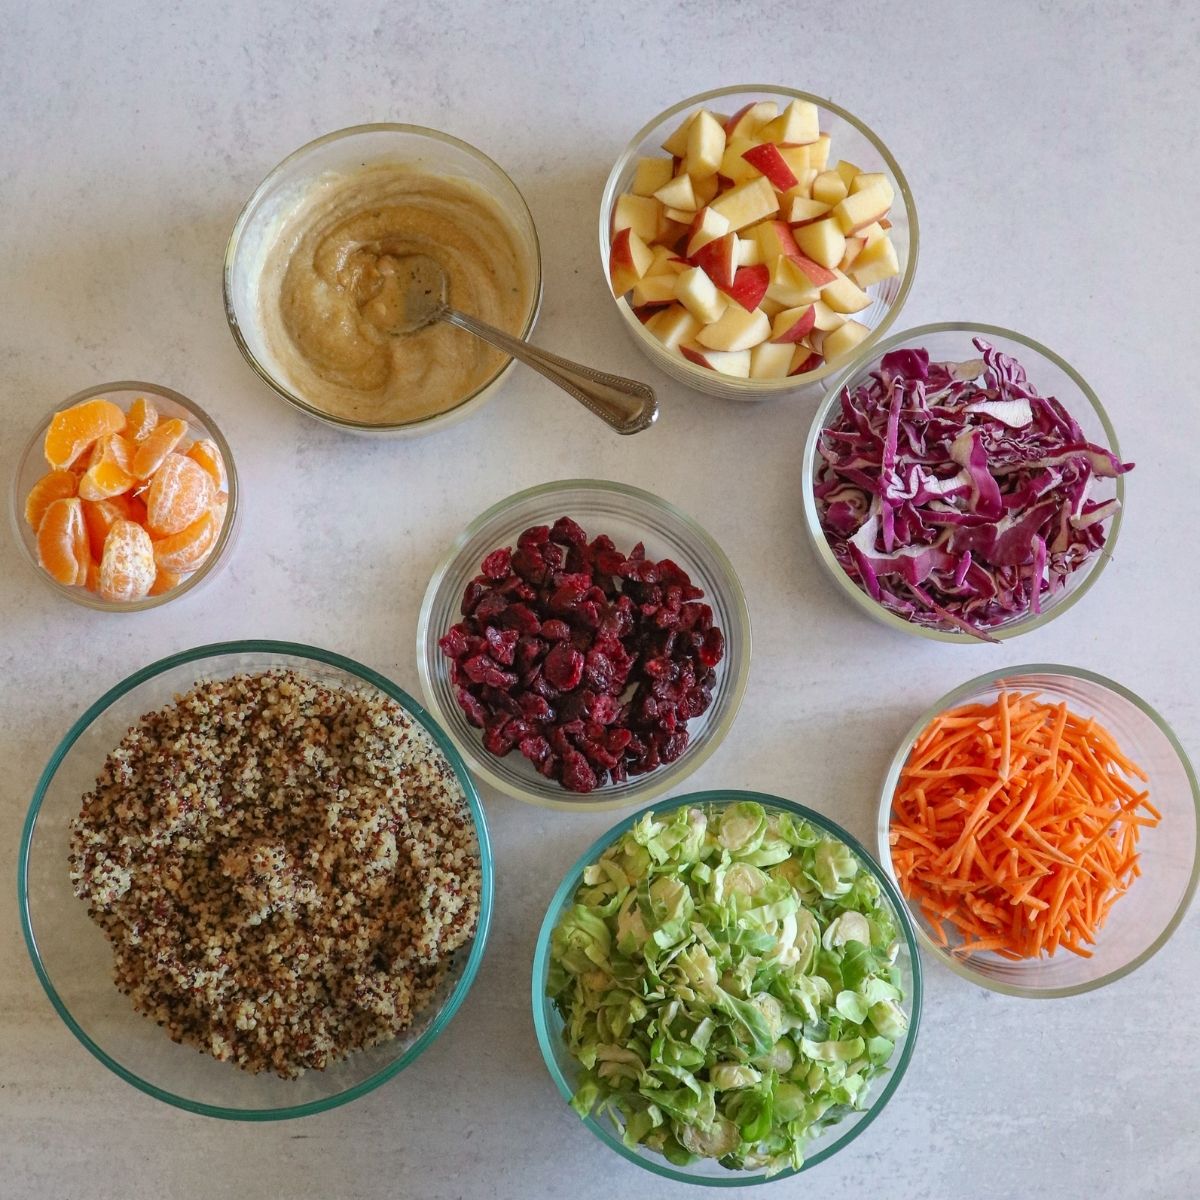 Quinoa, mandarins, tahini dressing, apples, red cabbage, carrots, Brussels sprouts, dried cranberries